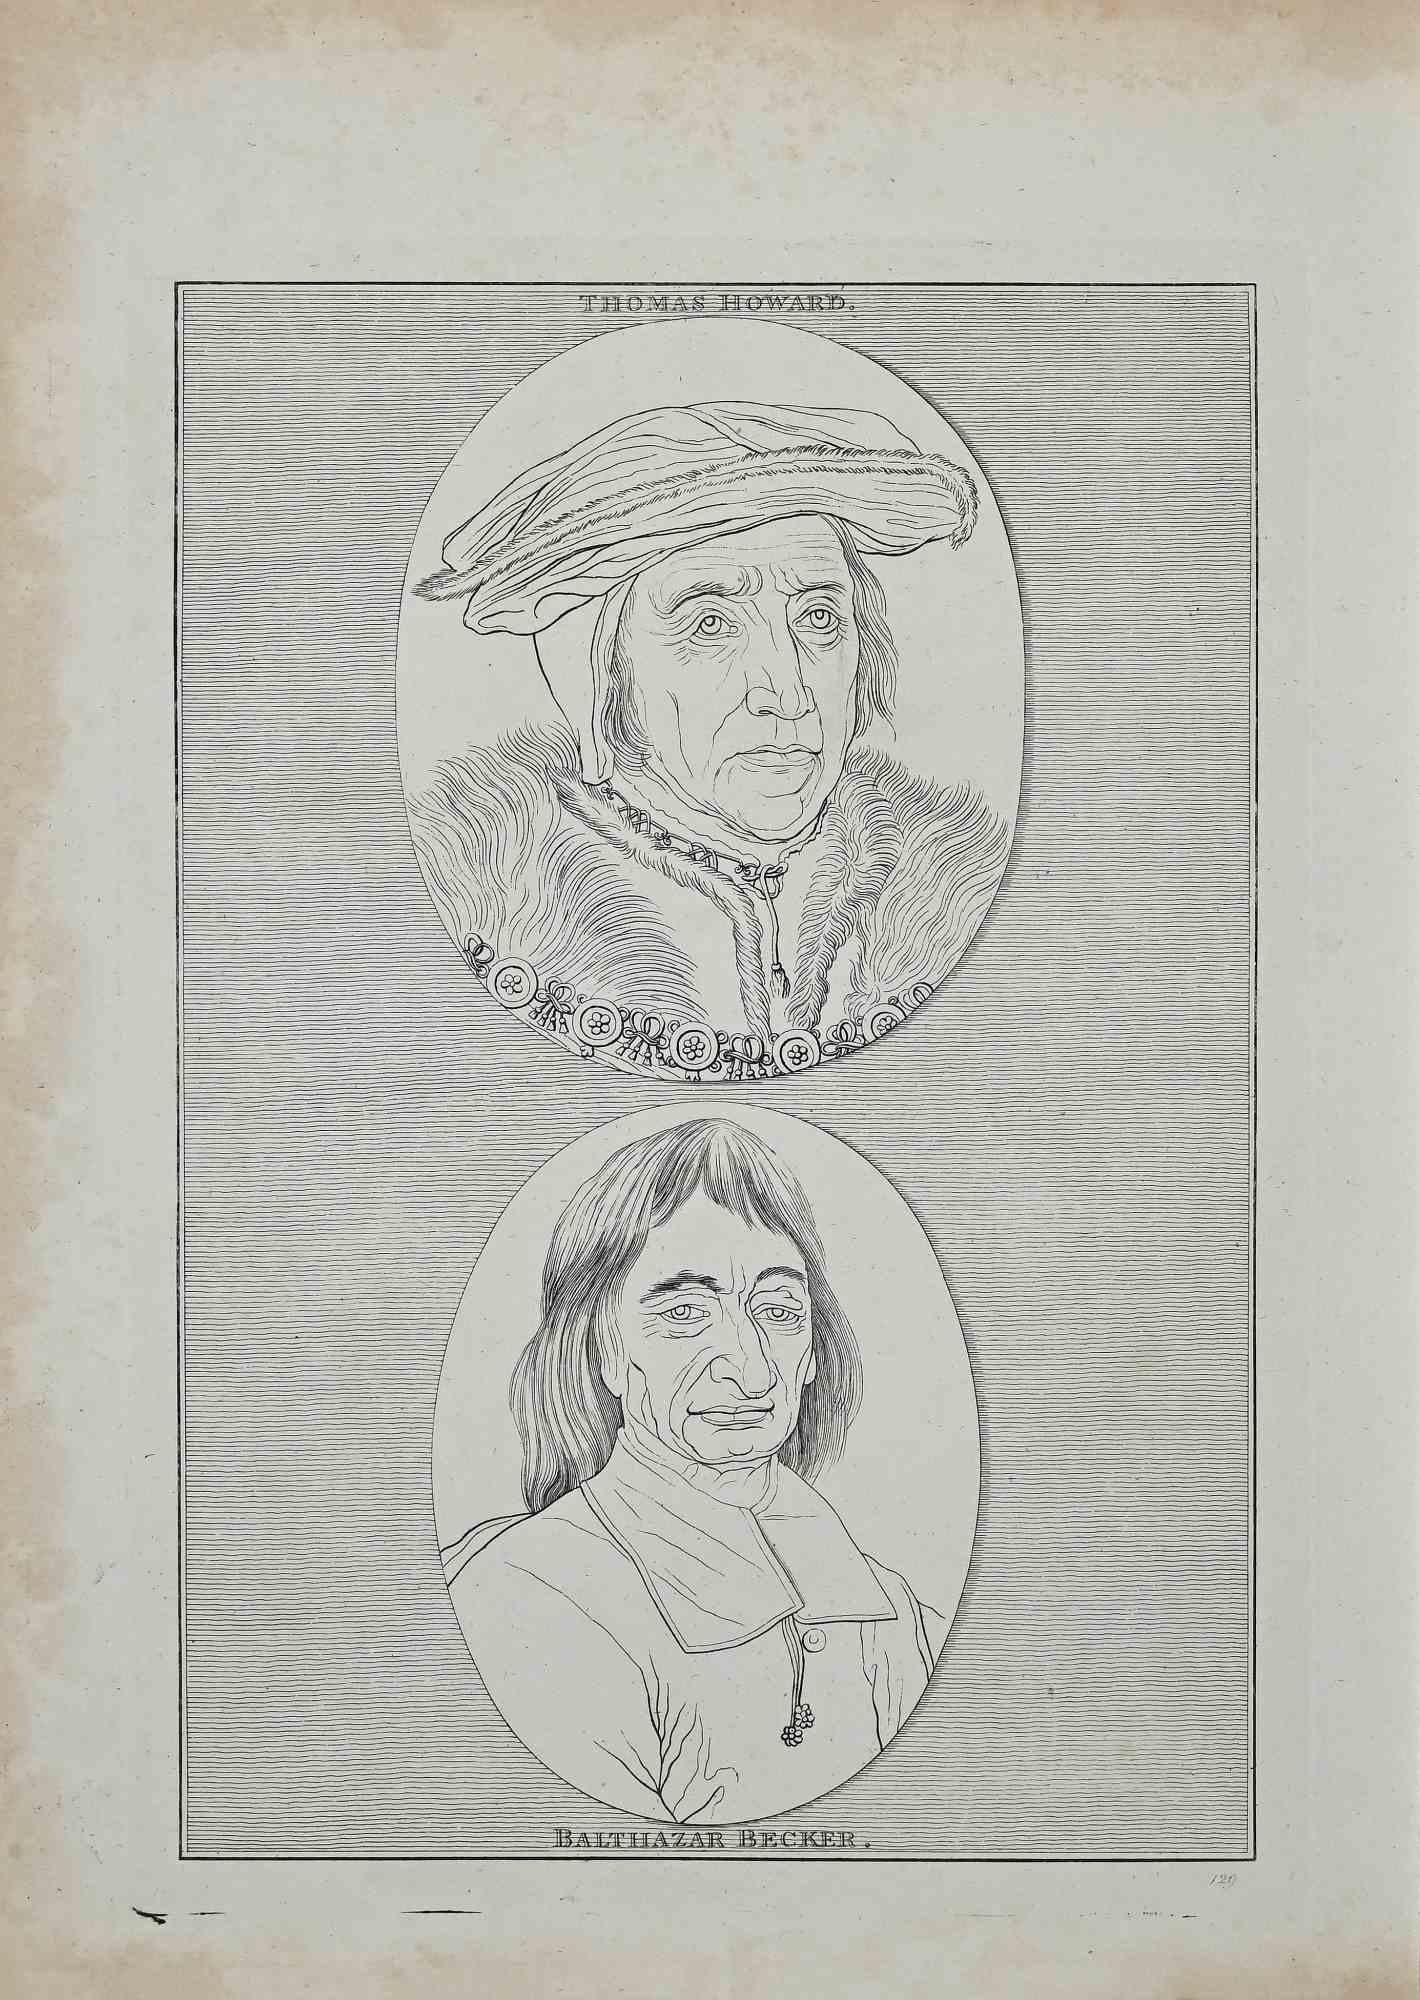 Portrait of Thomas Howard and Balthazar Becker is an original etching artwork realized by Thomas Holloway for Johann Caspar Lavater's "Essays on Physiognomy, Designed to Promote the Knowledge and the Love of Mankind", London, Bensley, 1810. 

Good